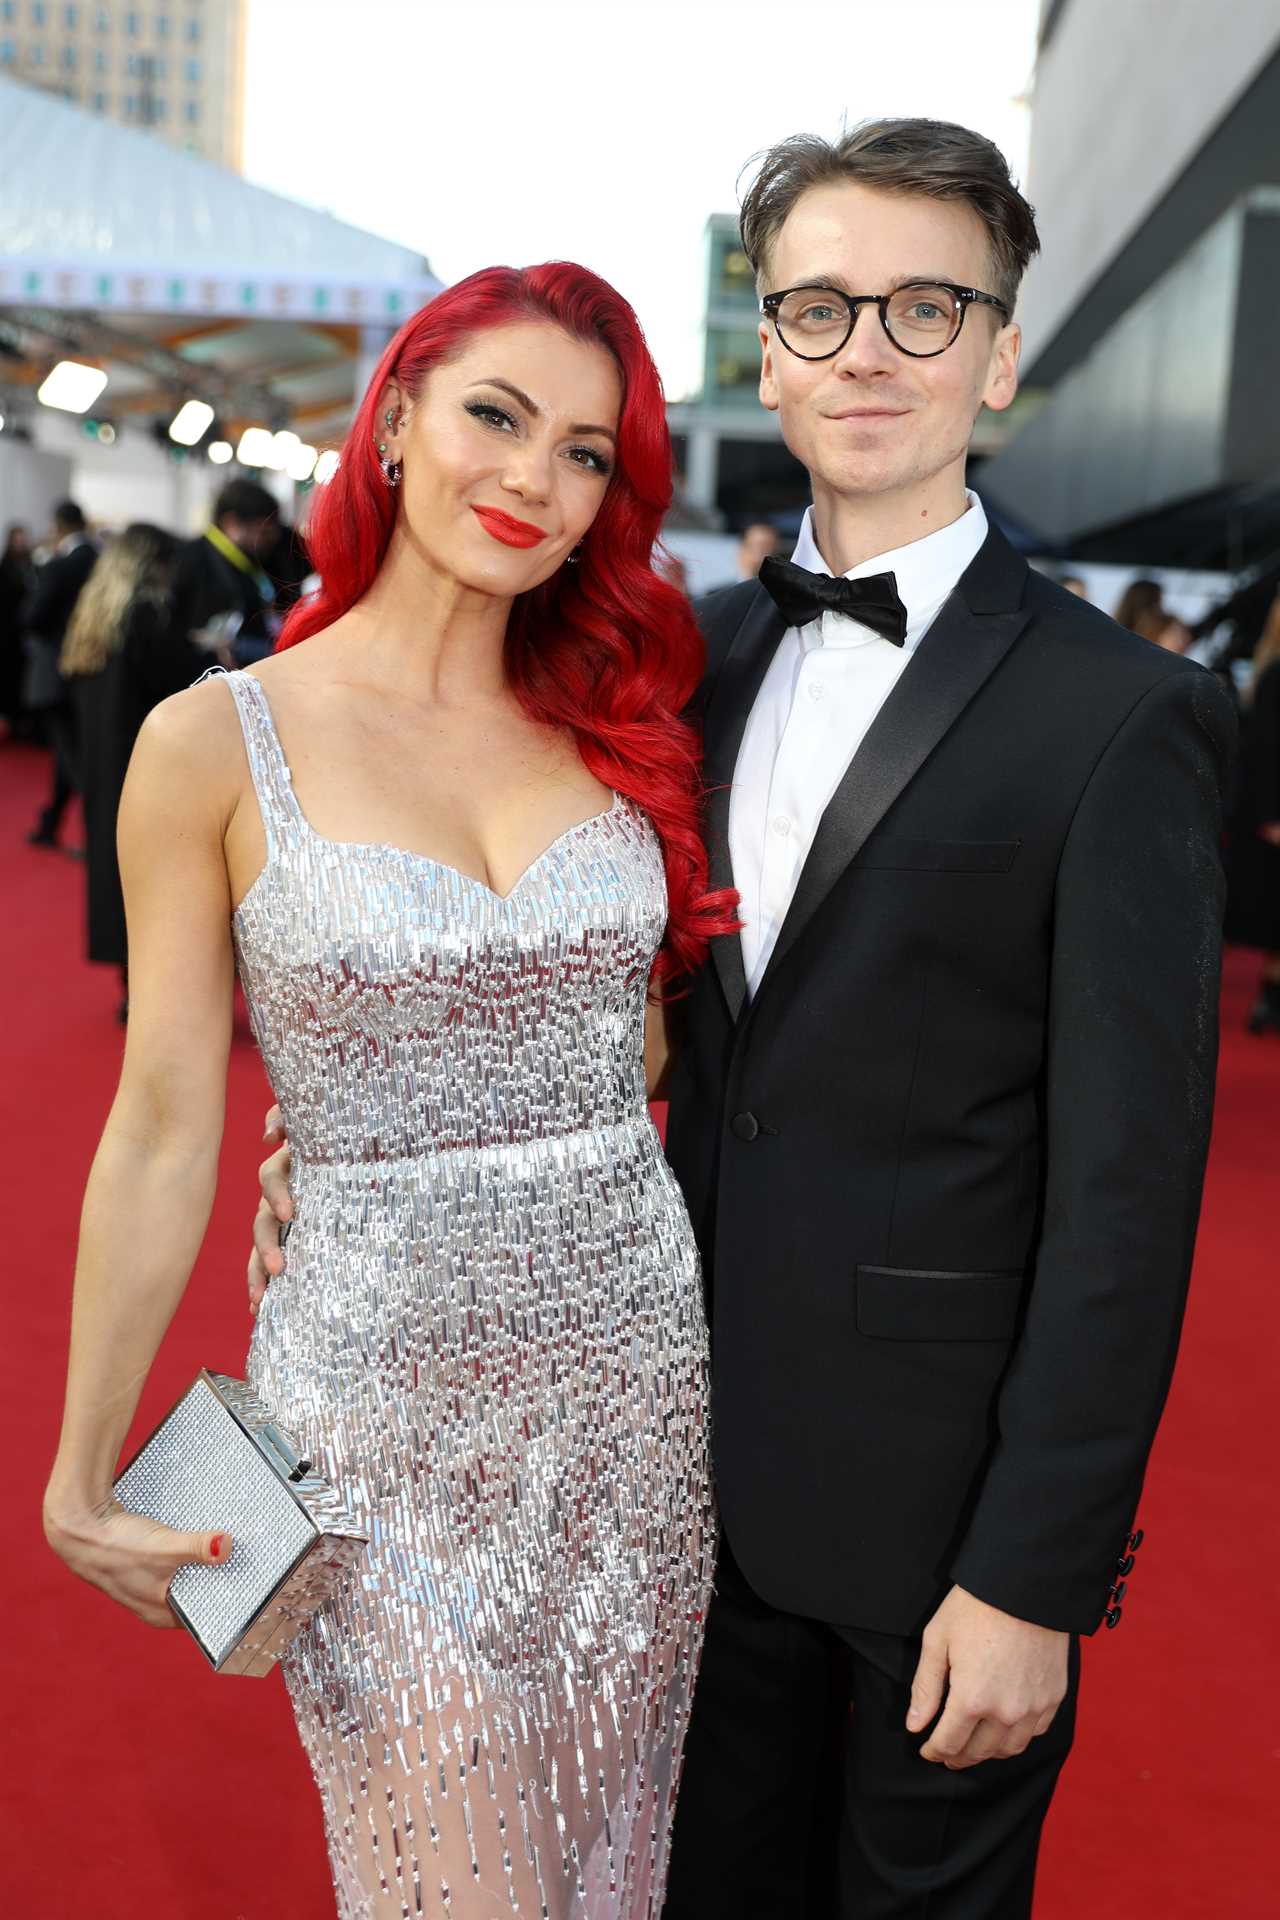 Joe Sugg and Dianne Buswell put their £1.35million Sussex home up for sale amid split rumours